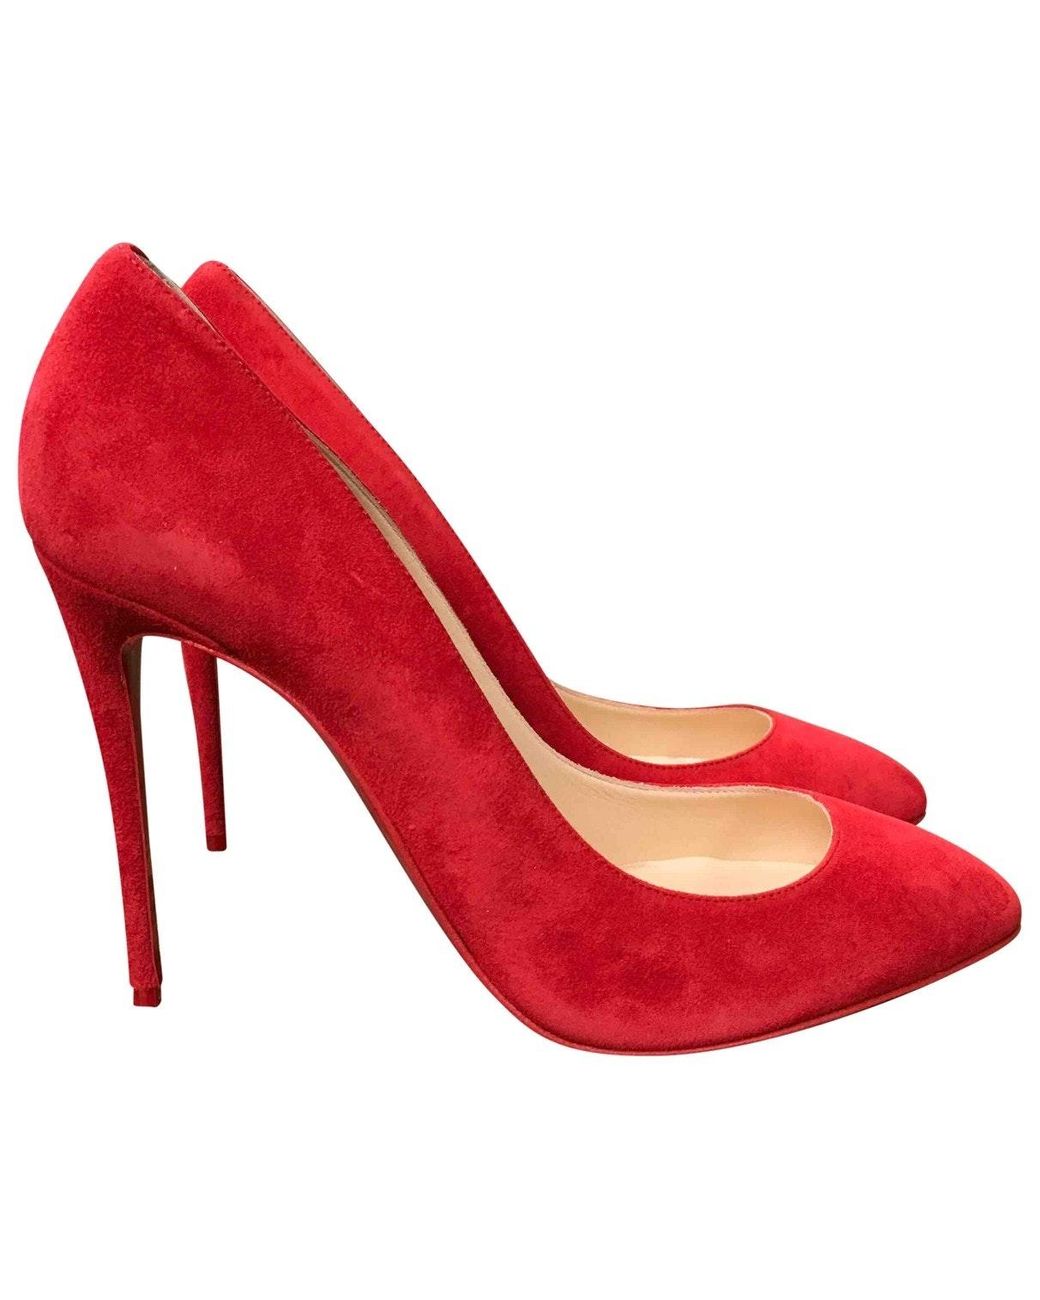 Christian Louboutin Suede Heels in Red - Lyst